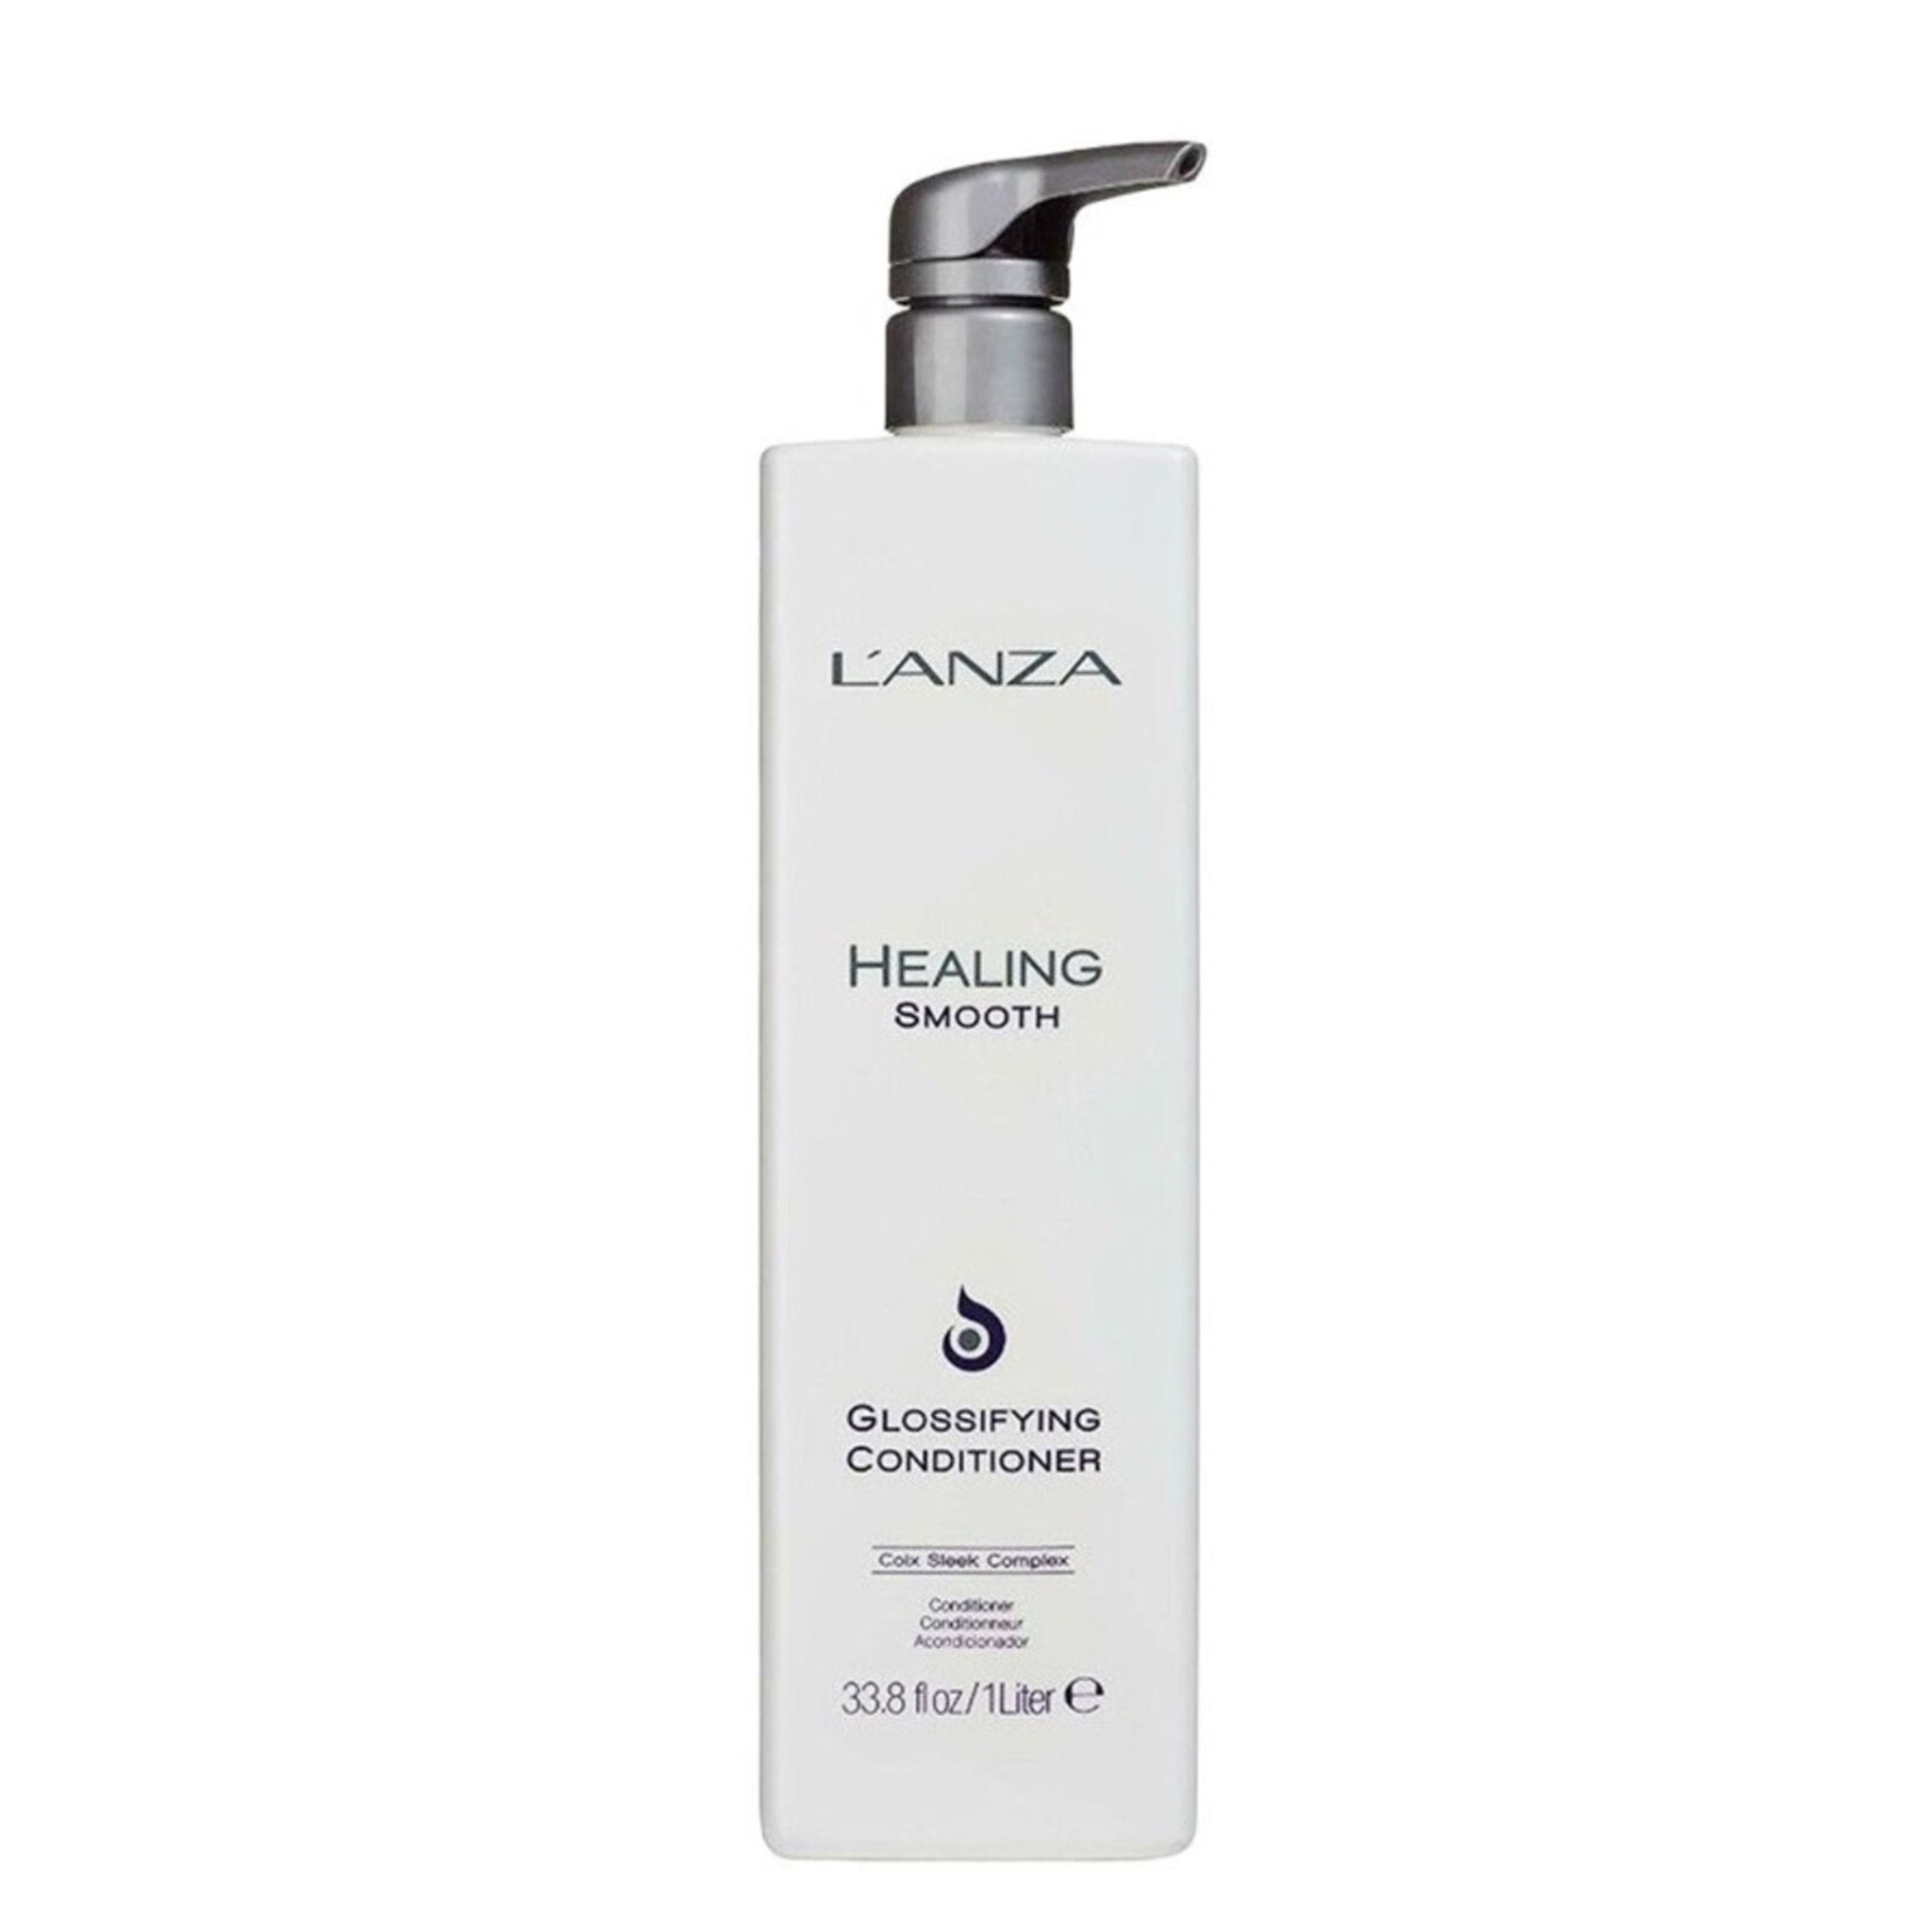 L’Anza. Healing Smooth Revitalisant Glossifying - 1000ml - Concept C. Shop